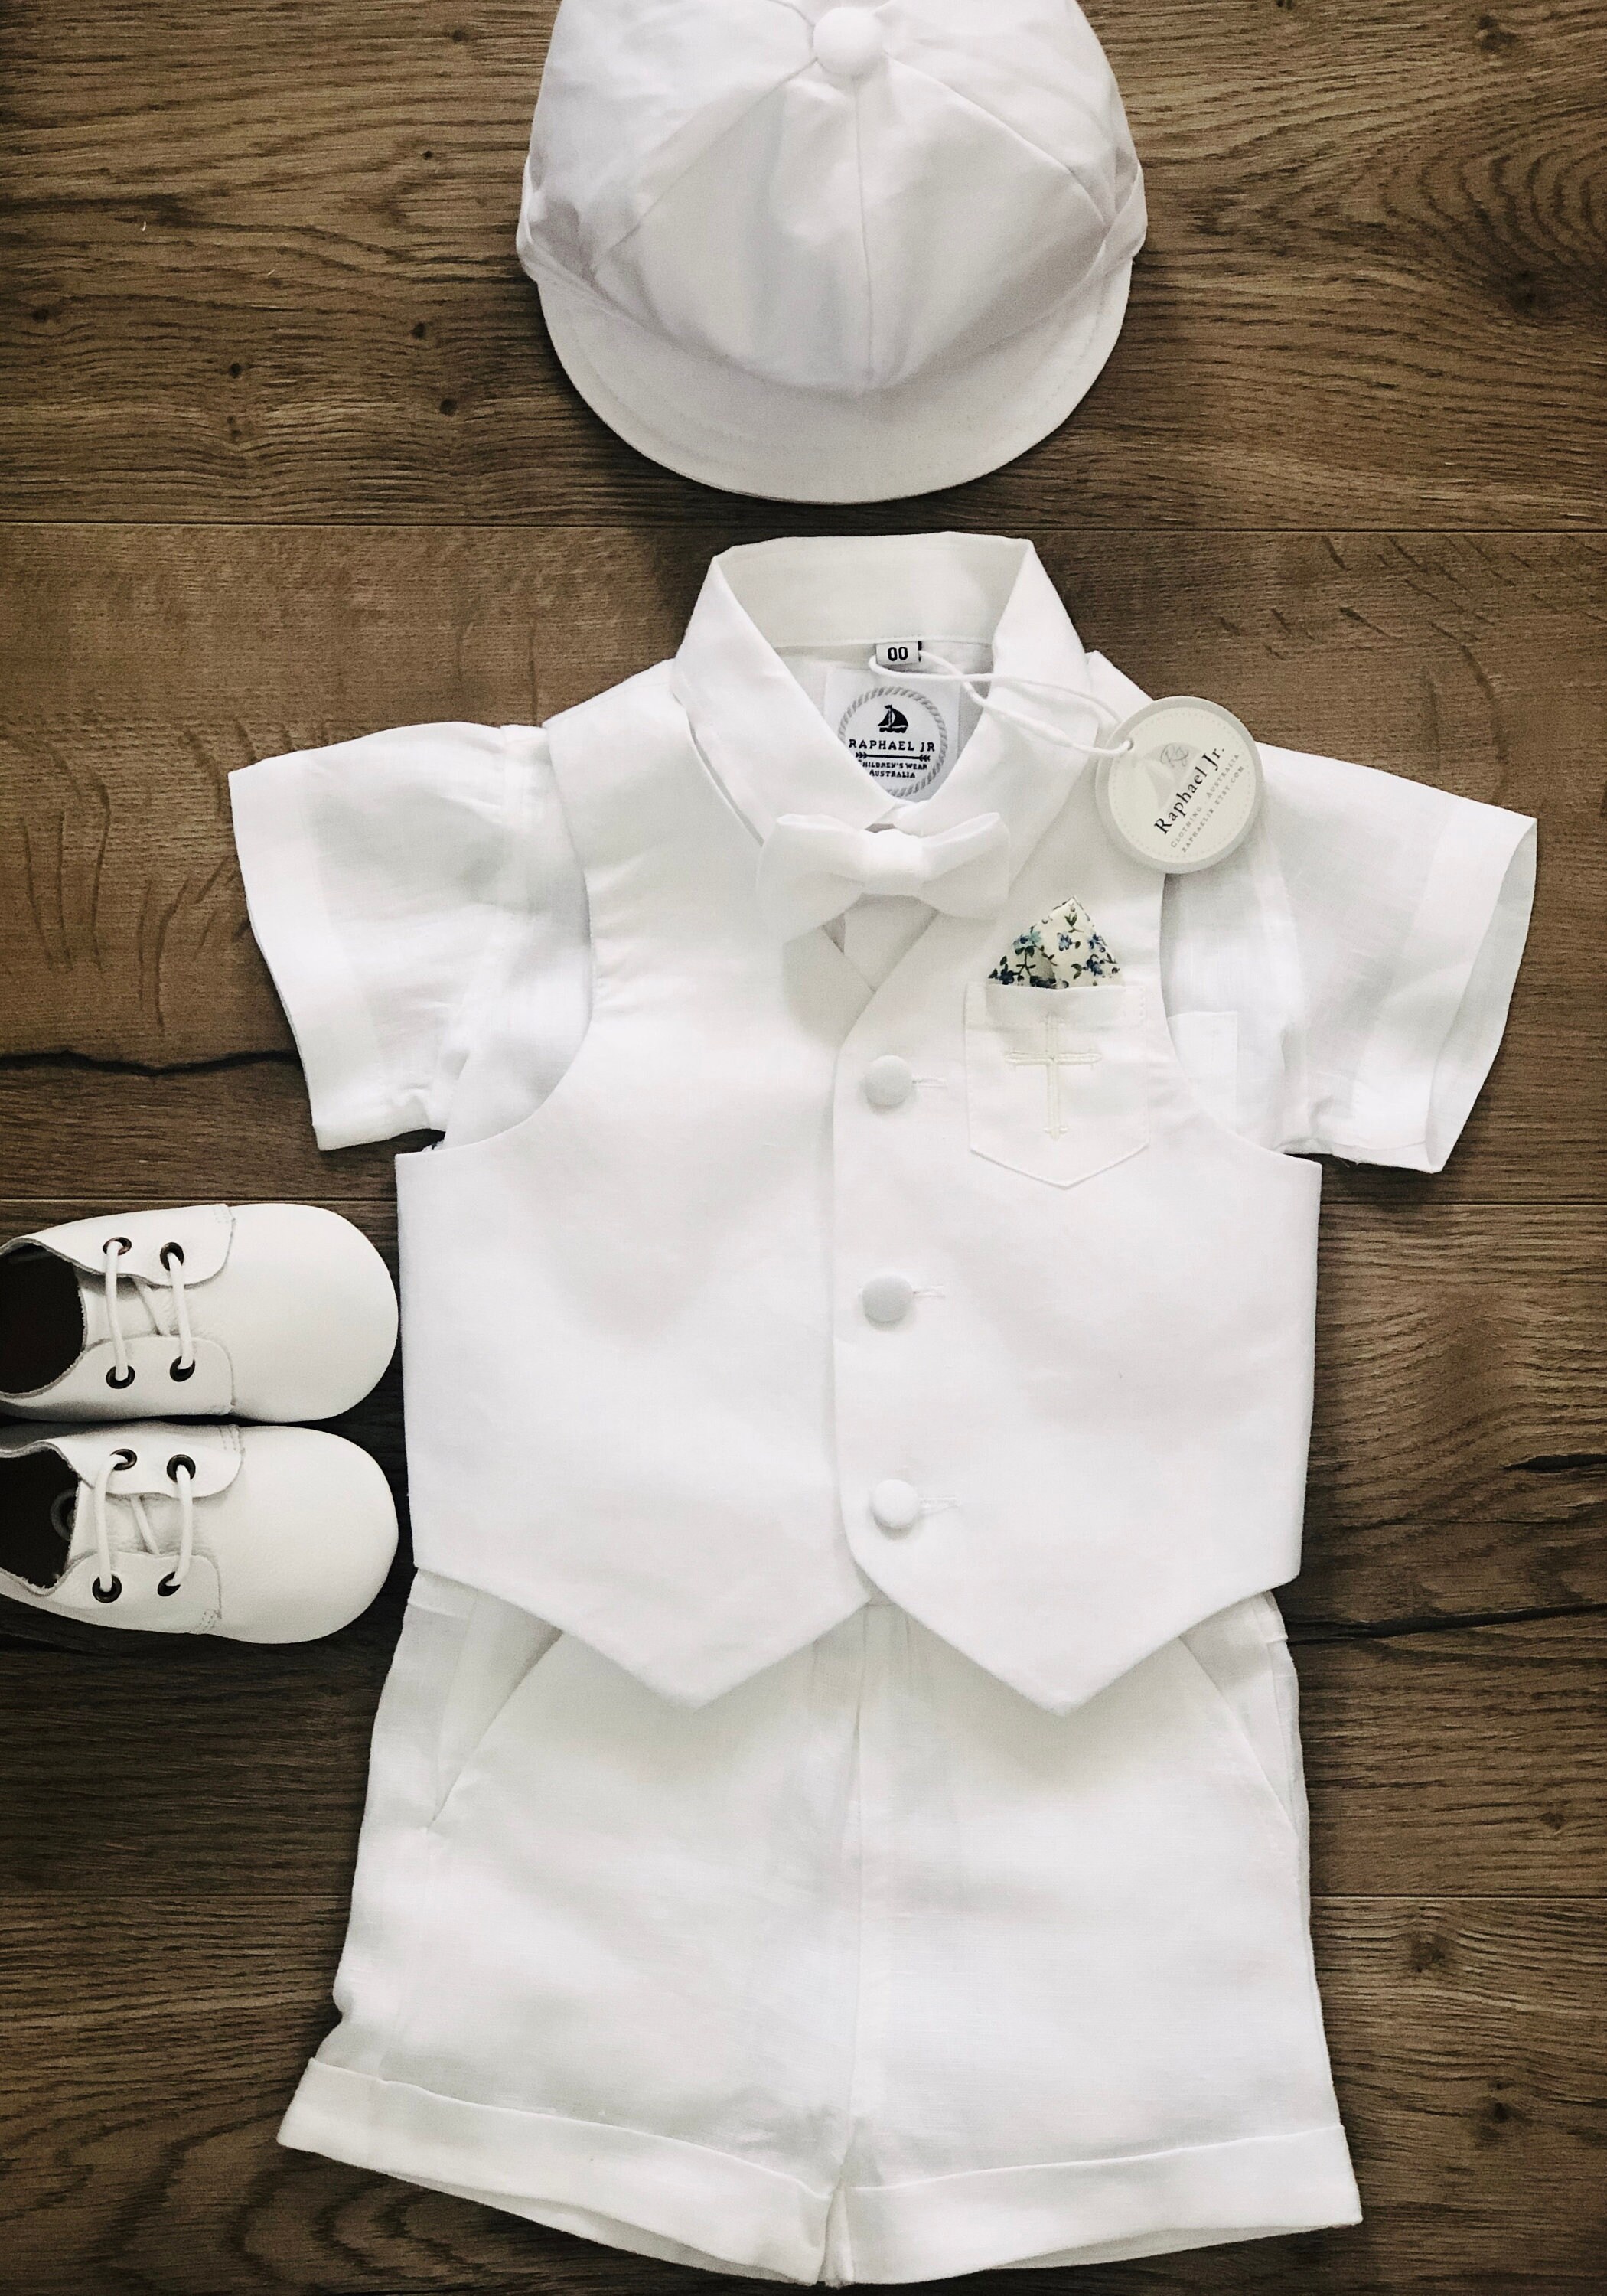 Clothing Boys Clothing Baby Boys Clothing Suits Boy Christening Outfit Baby Shorts Wedding Outfit Baby Boy Waistcoat Baptism Outfit Boy Boy Linen Outfit Boy Blessing Outfit with Vest 